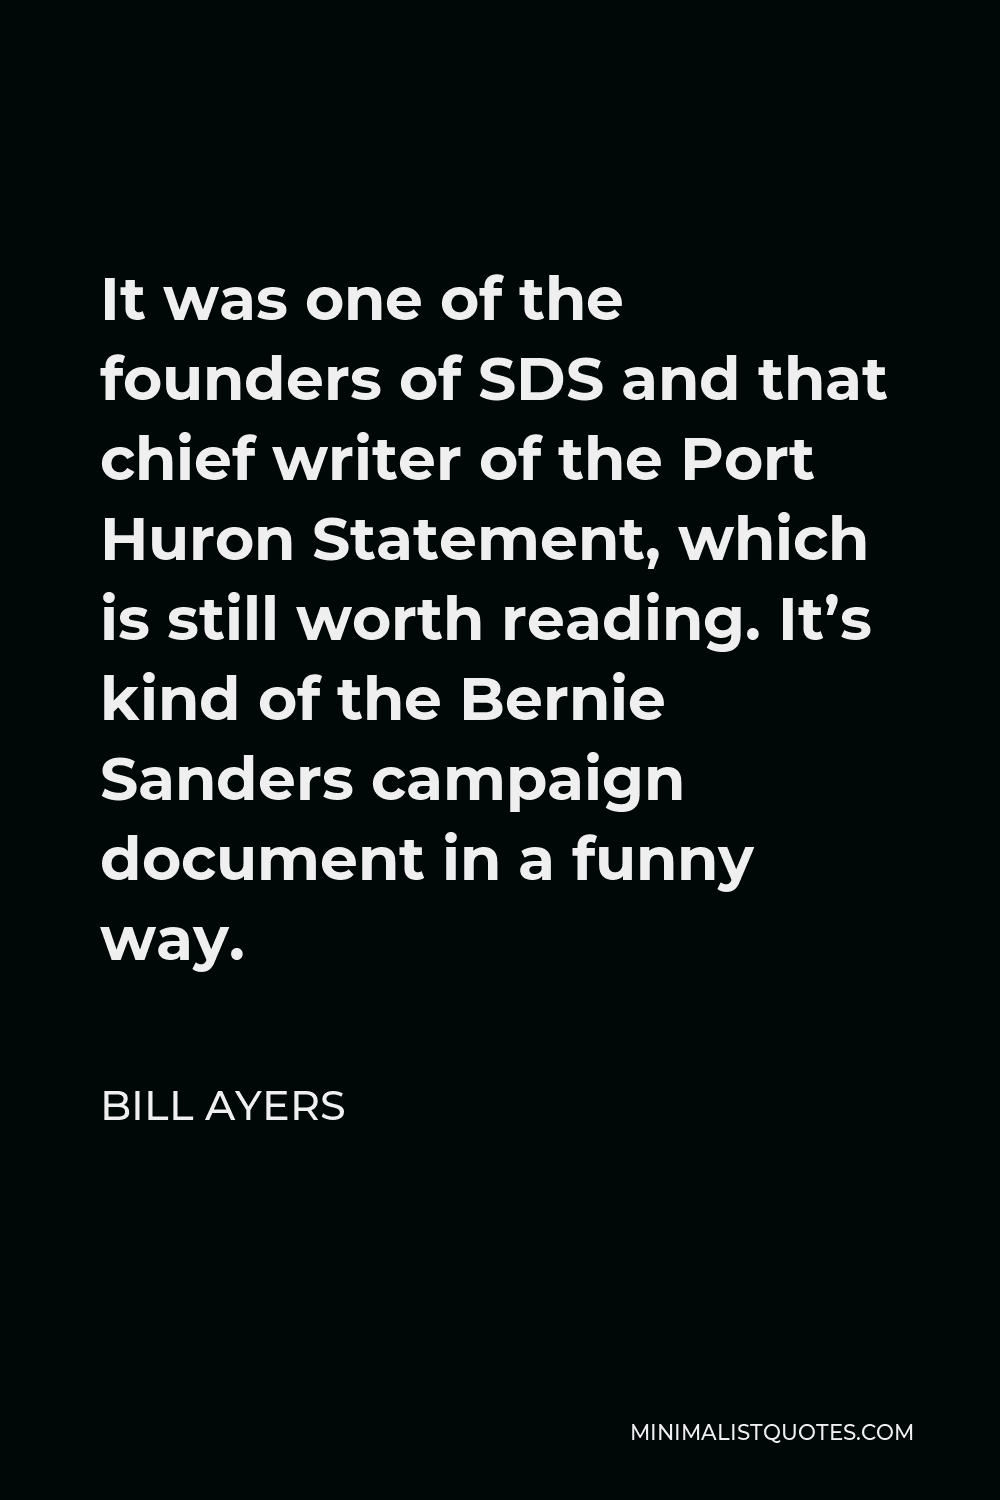 Bill Ayers Quote - It was one of the founders of SDS and that chief writer of the Port Huron Statement, which is still worth reading. It’s kind of the Bernie Sanders campaign document in a funny way.